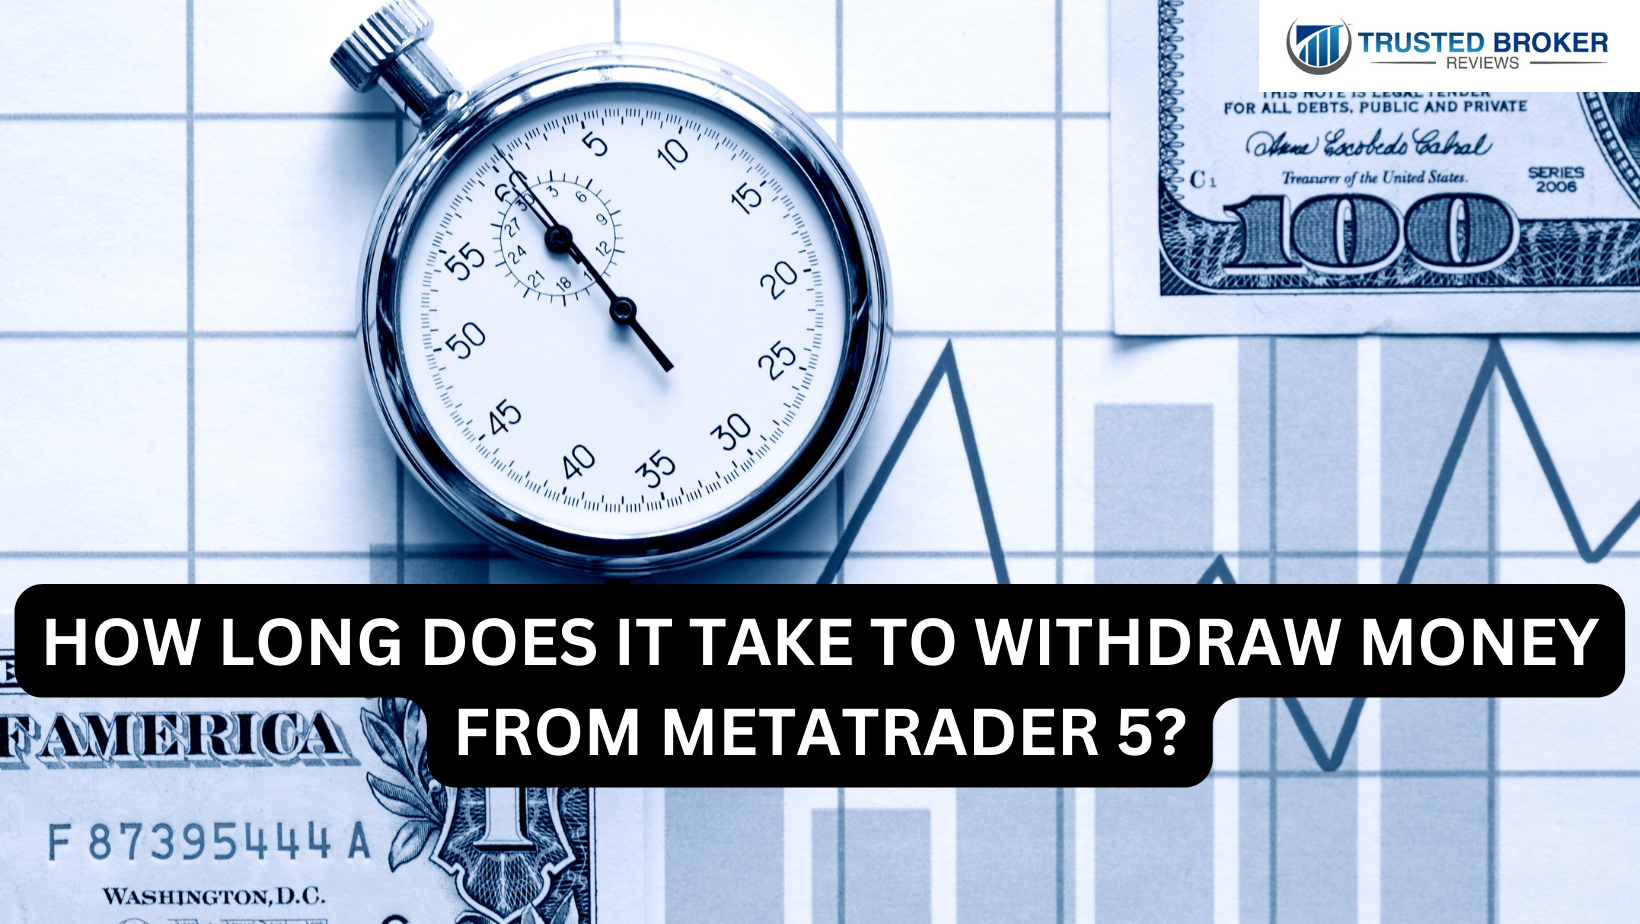 How long does it take to withdraw money from MetaTrader 5?